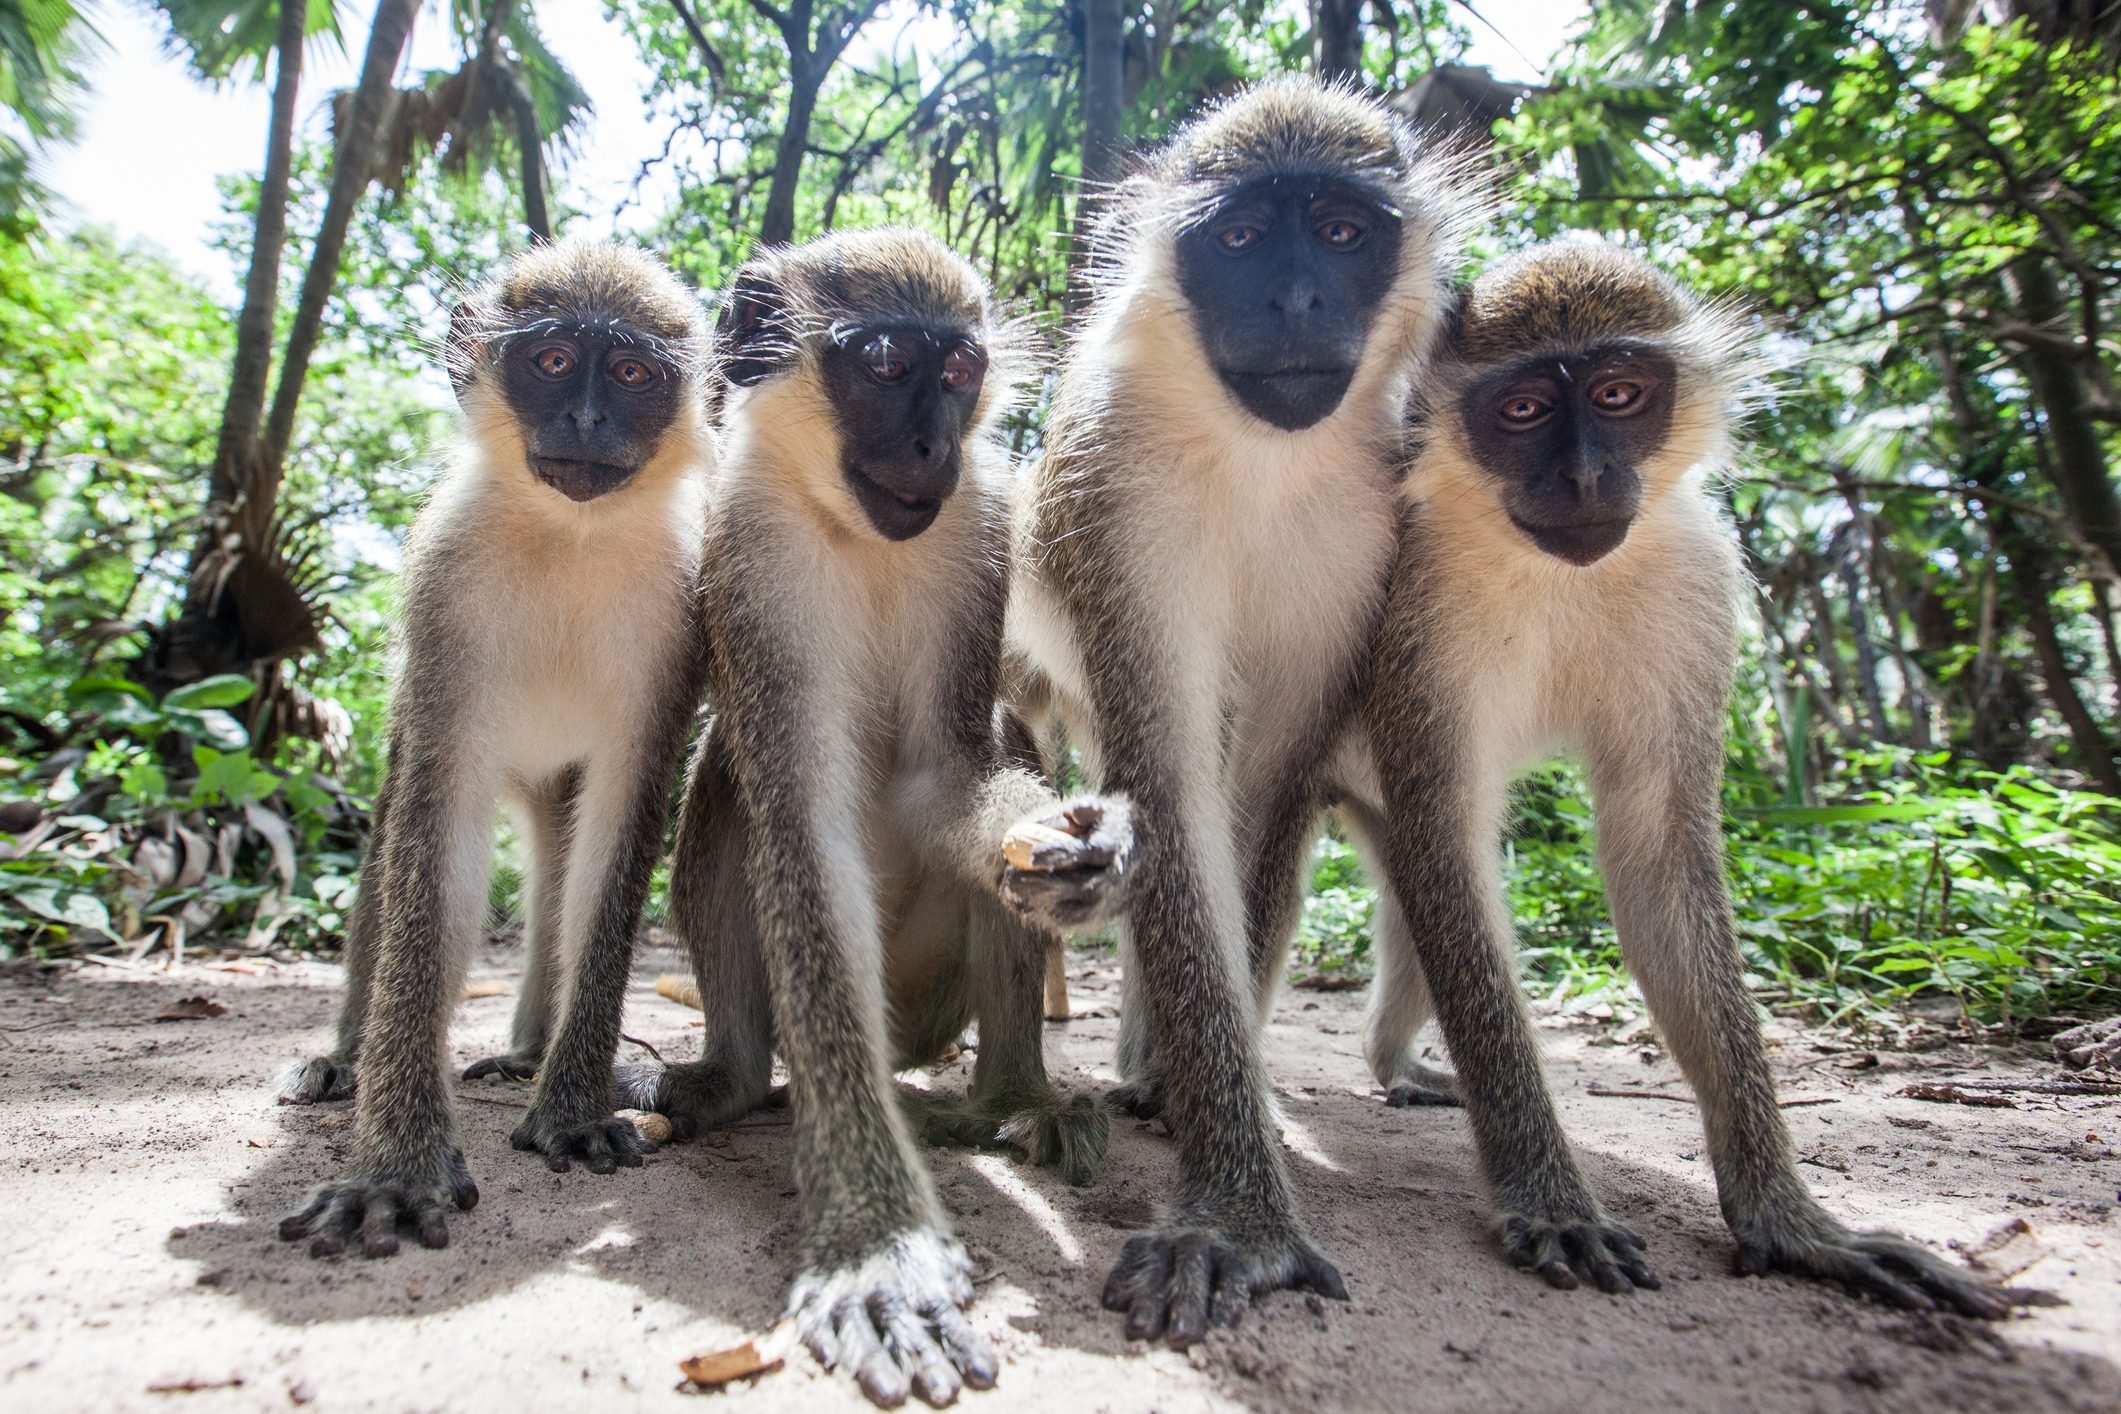 Monkeys pose for a photo in The Gambia